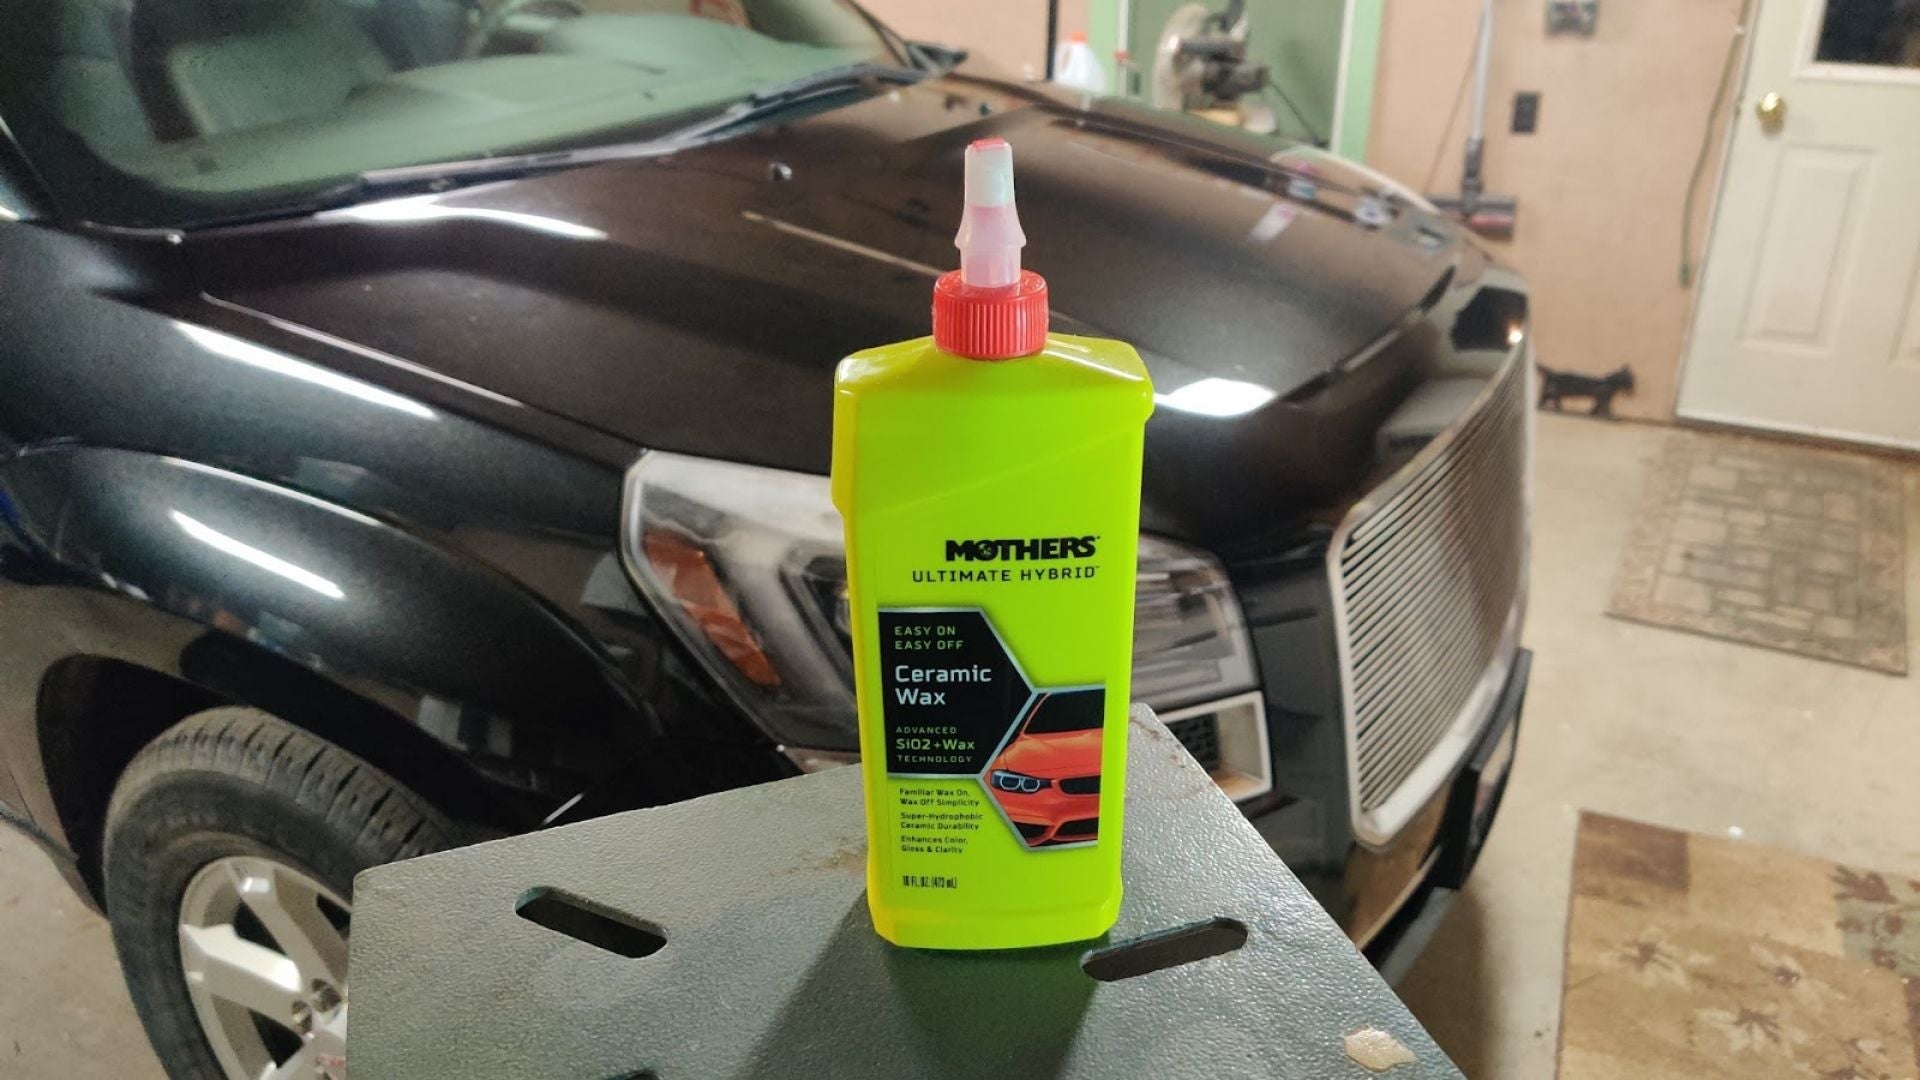 Best way to apply Meguiars Hybrid Ceramic wax - Durability test & review 